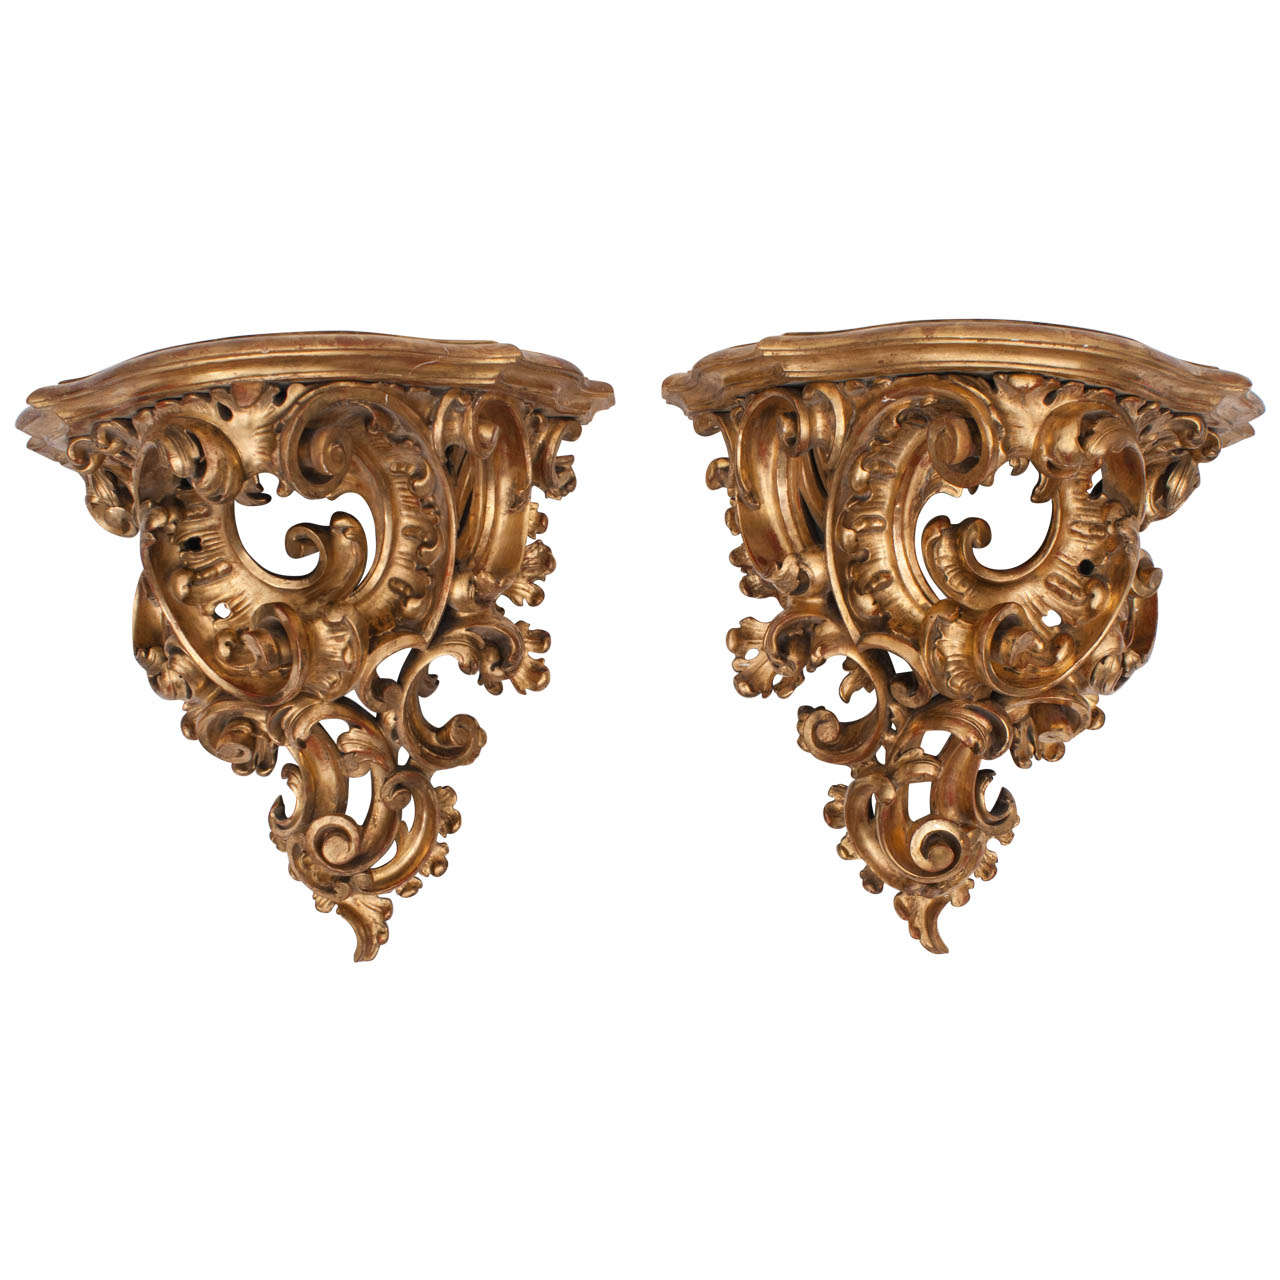 Pair of Large Baroque Period Wall Brackets For Sale